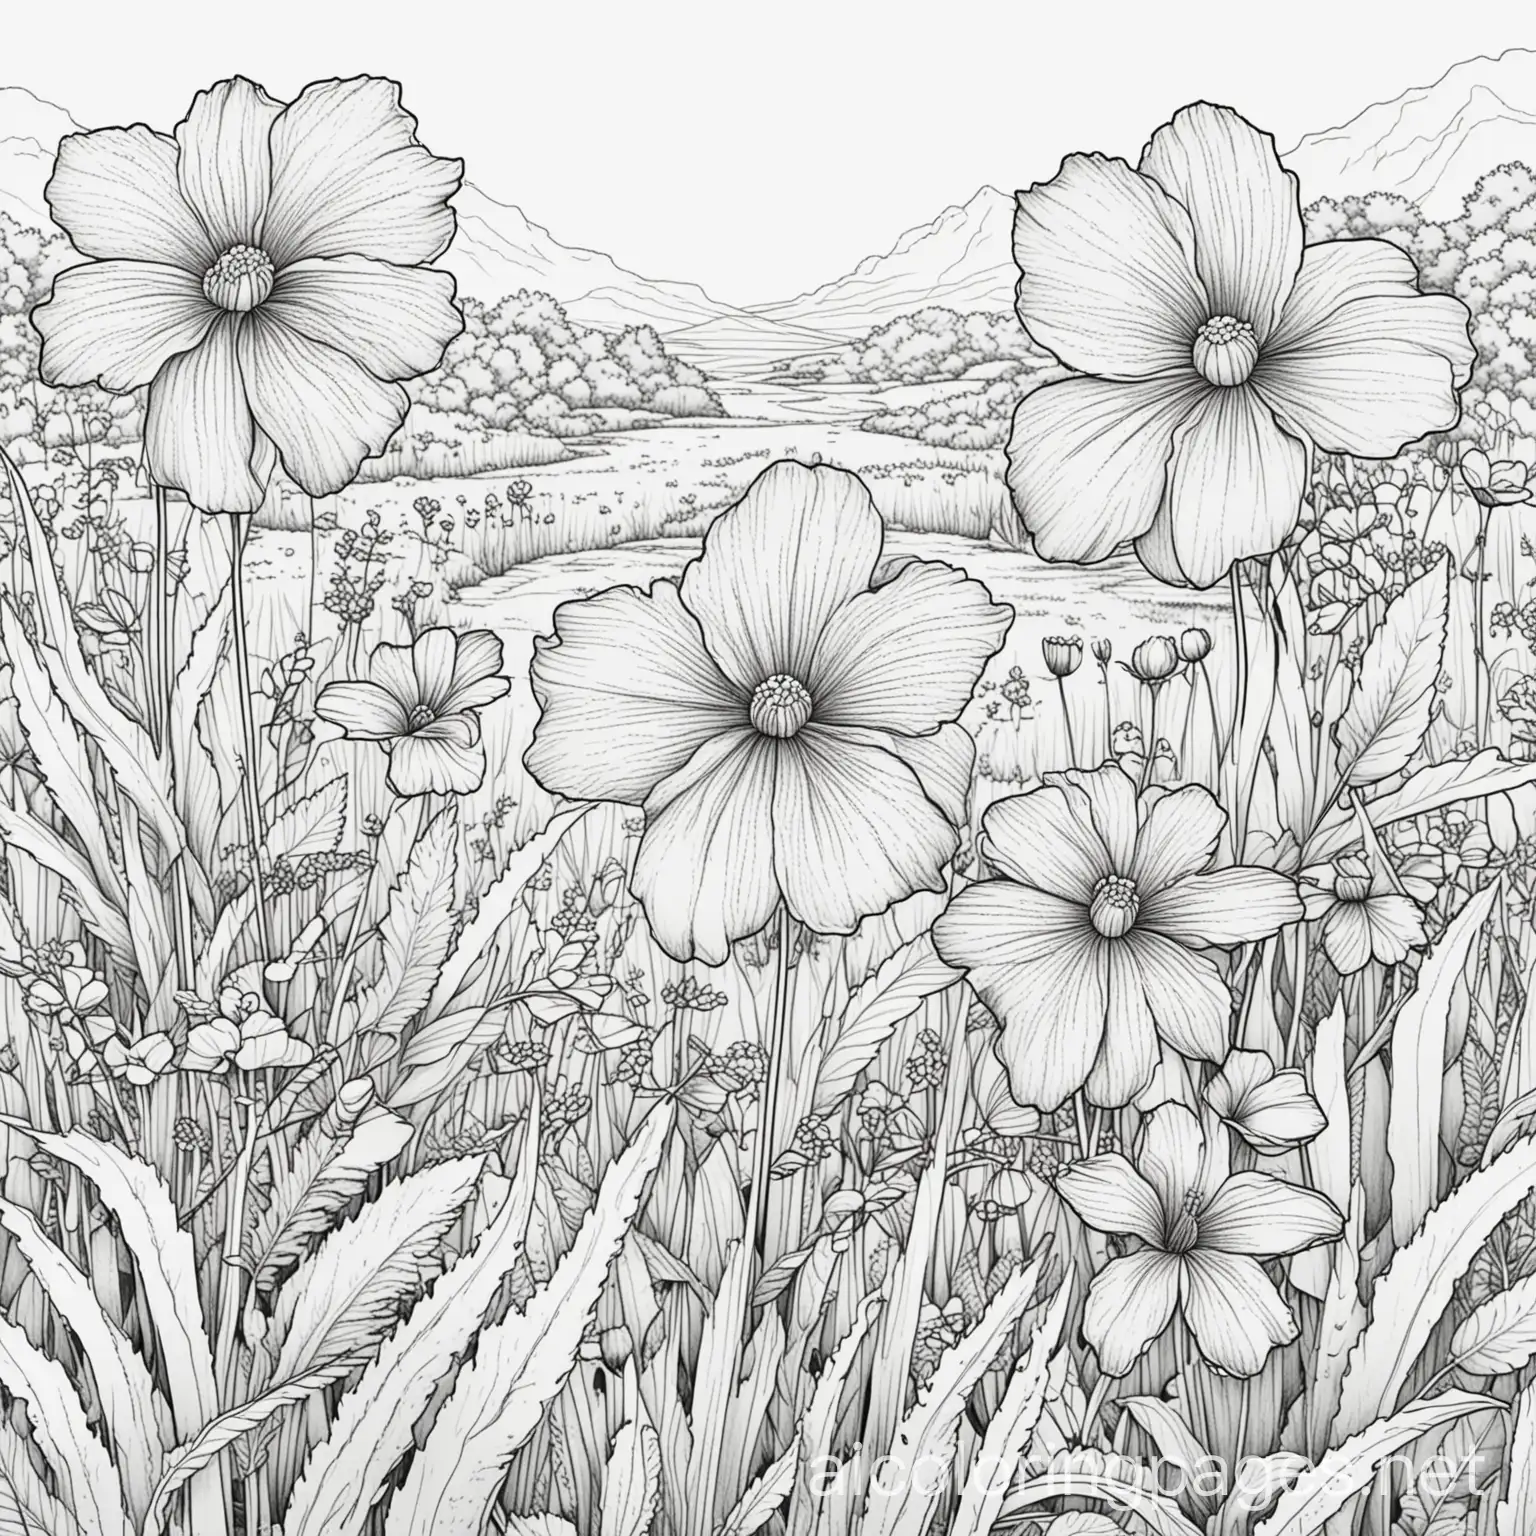 violet  flower

in feild

, black and white, fine lines, no shading, no colour, Coloring Page, black and white, line art, white background, Simplicity, Ample White Space. The background of the coloring page is plain white to make it easy for young children to color within the lines. The outlines of all the subjects are easy to distinguish, making it simple for kids to color without too much difficulty